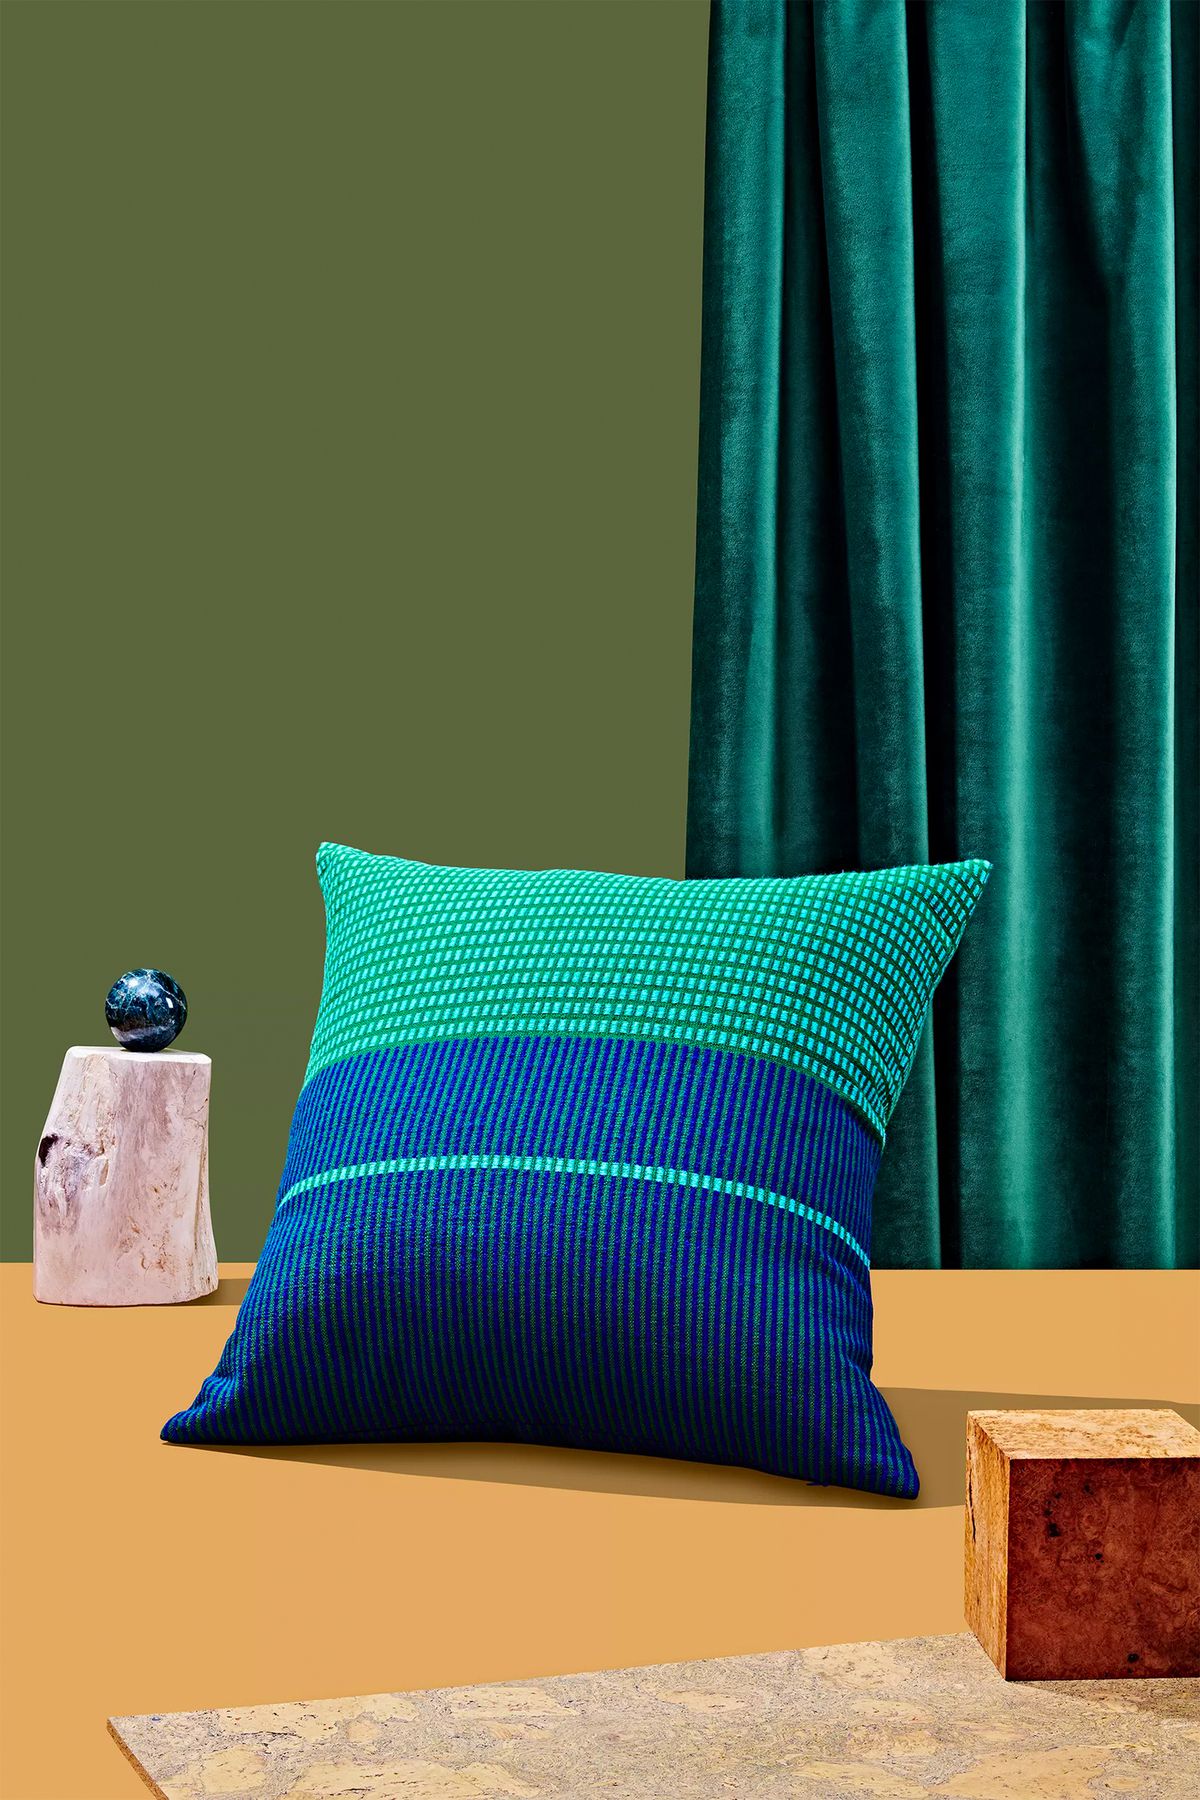 A green and blue handwoven pillow which is part of the Holiday Gift Guide 2019 for Curbed. The pillow is sitting upright on an orange surface. There are various design objects flanking the pillow. In the background is a green curtain and backdrop.